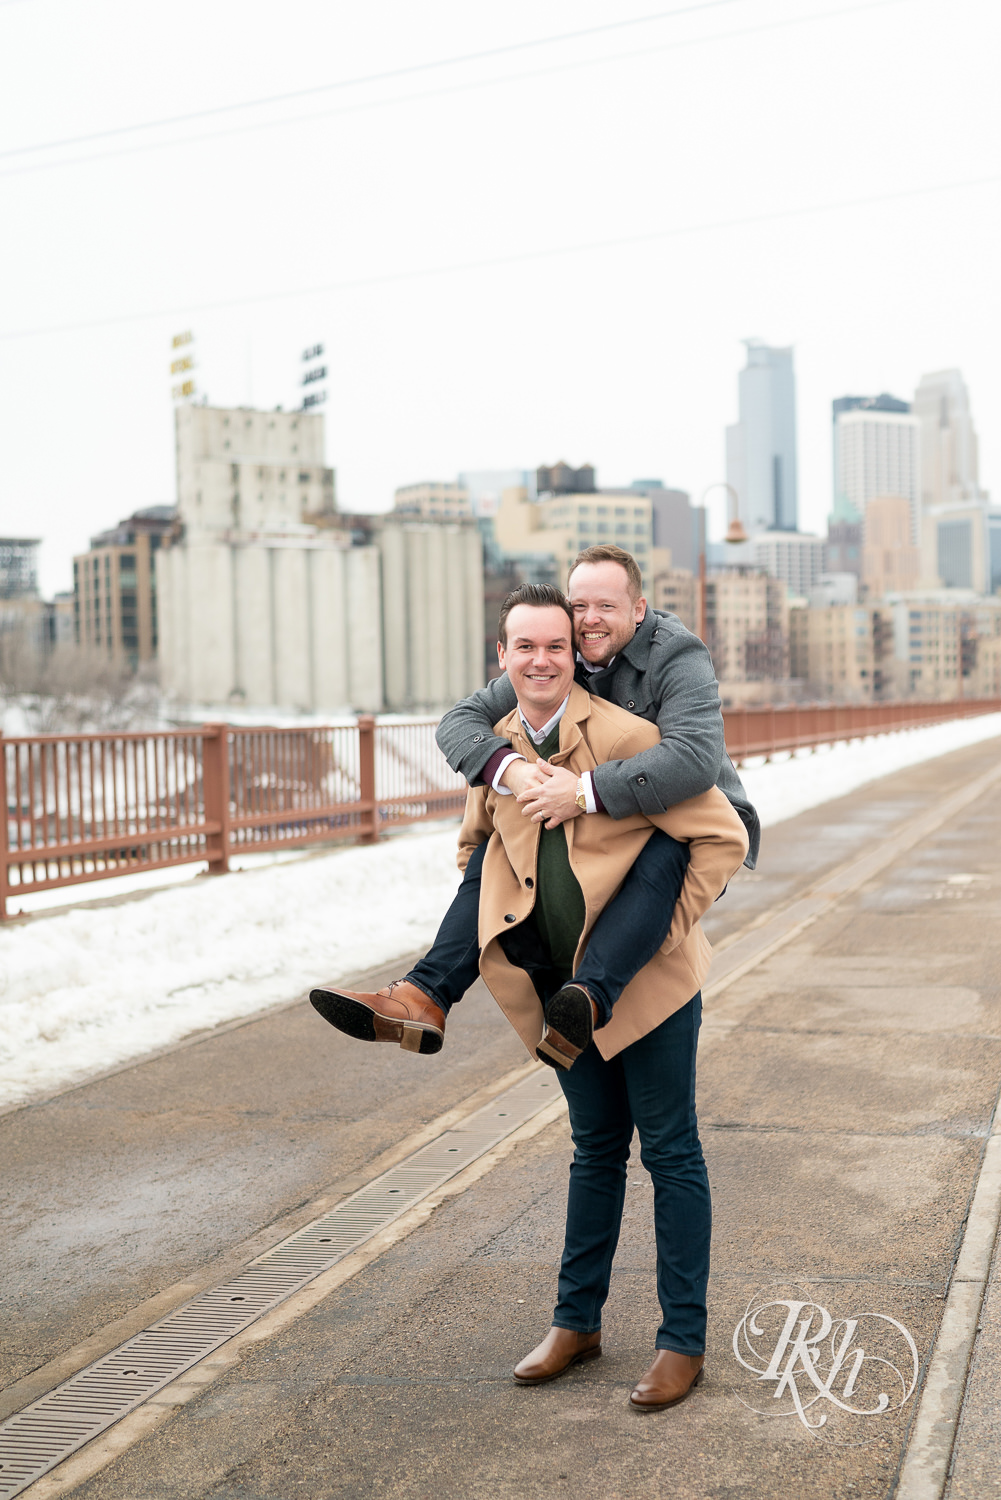 Gay men do a piggy back ride on the Stone Arch Bridge during the winter in Minneapolis, Minnesota.